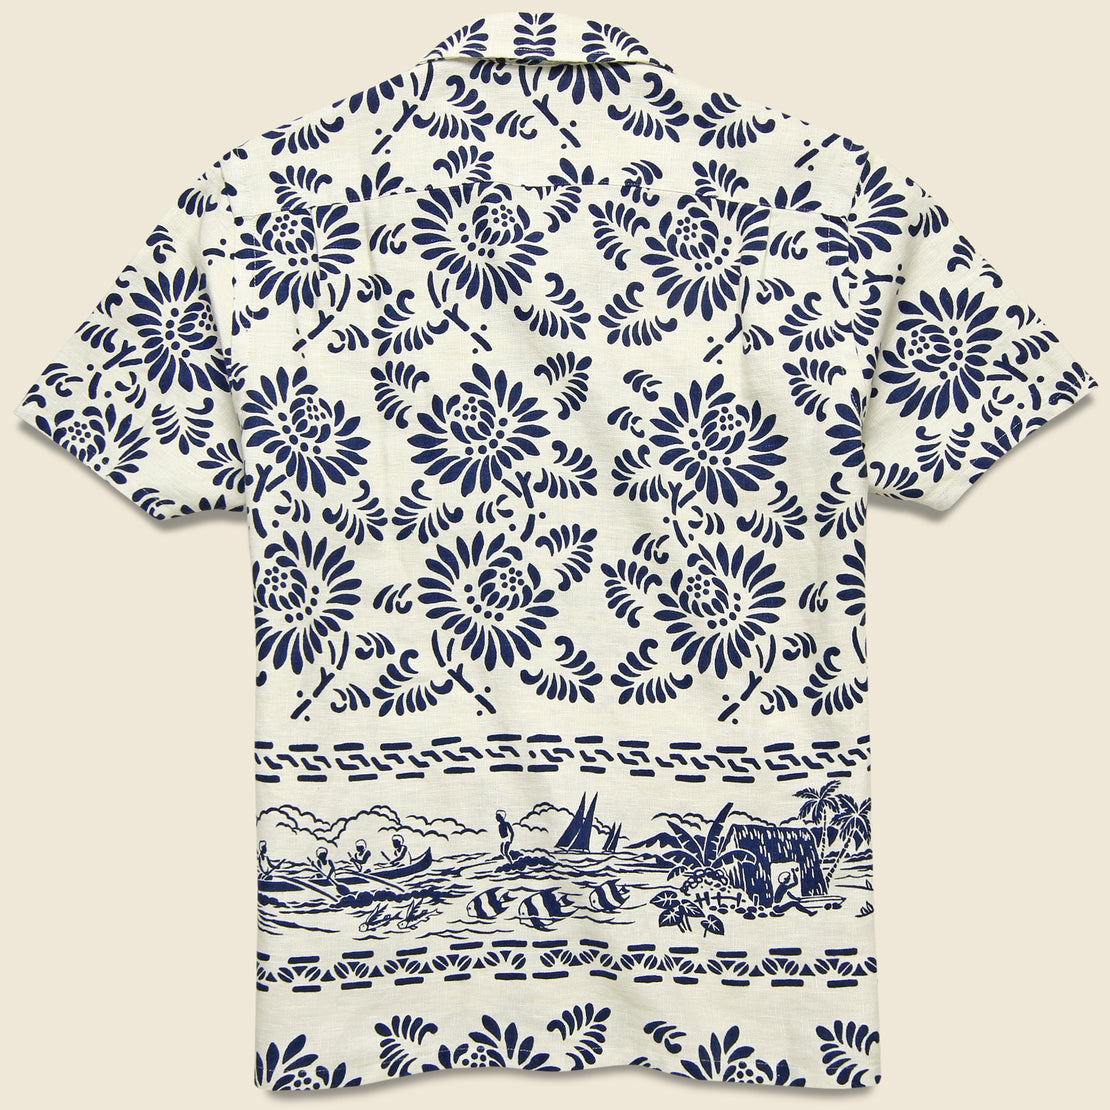 Print Linen Camp Shirt - Cream/Blue - RRL - STAG Provisions - Tops - S/S Woven - Other Pattern